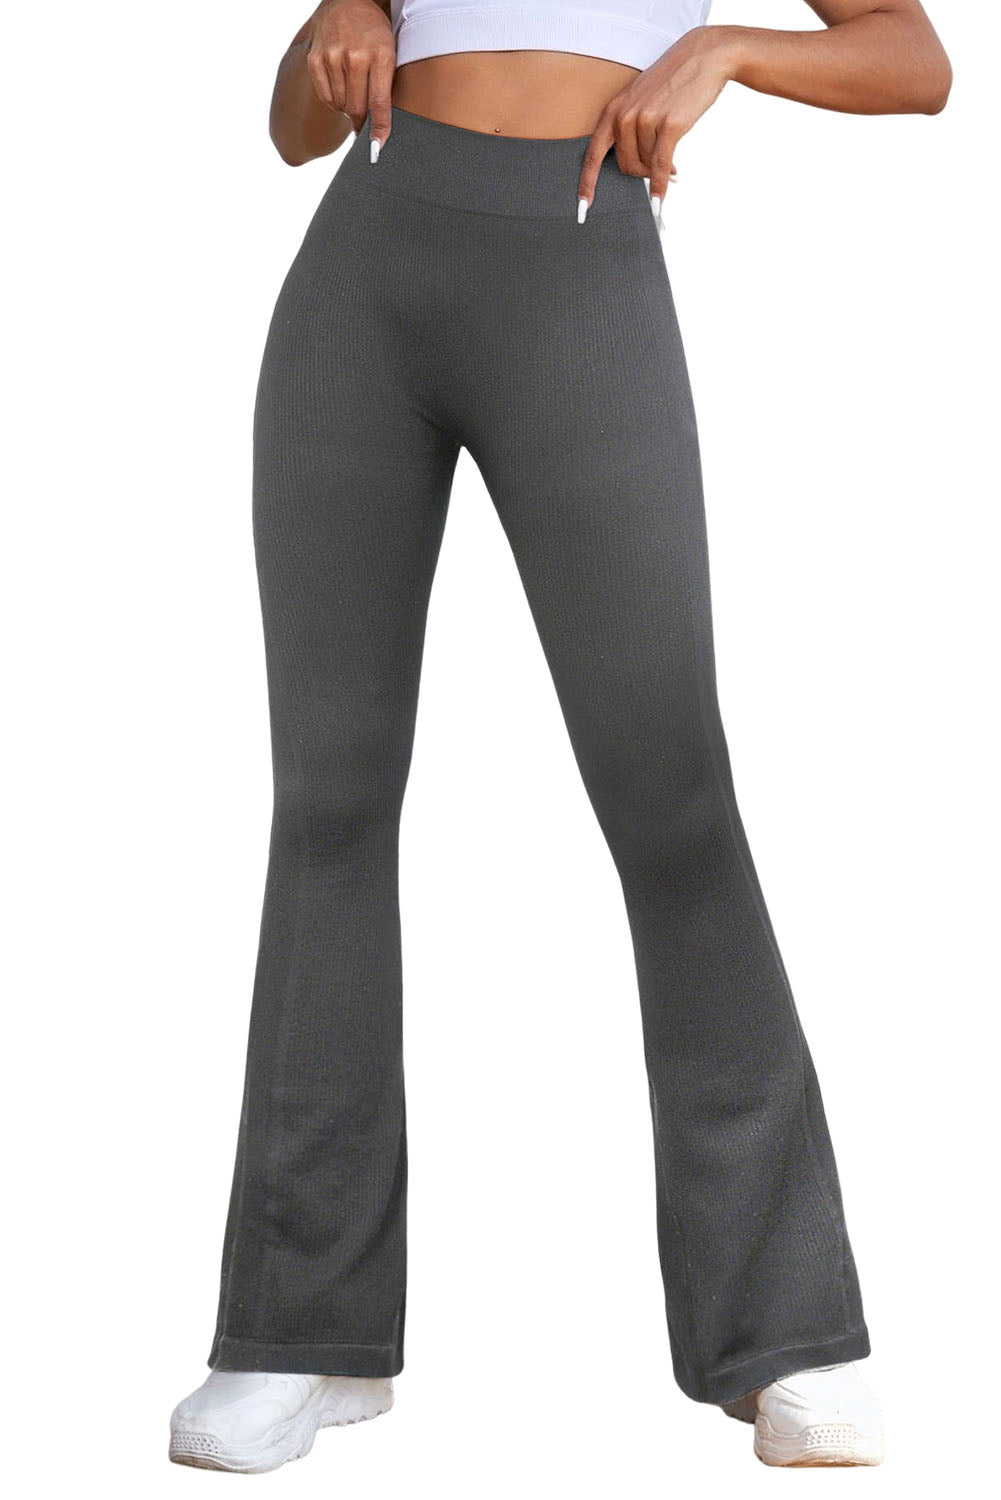 LC265202-11-S, LC265202-11-M, LC265202-11-L, Gray High Waist Tummy Control Flared Sports Pants